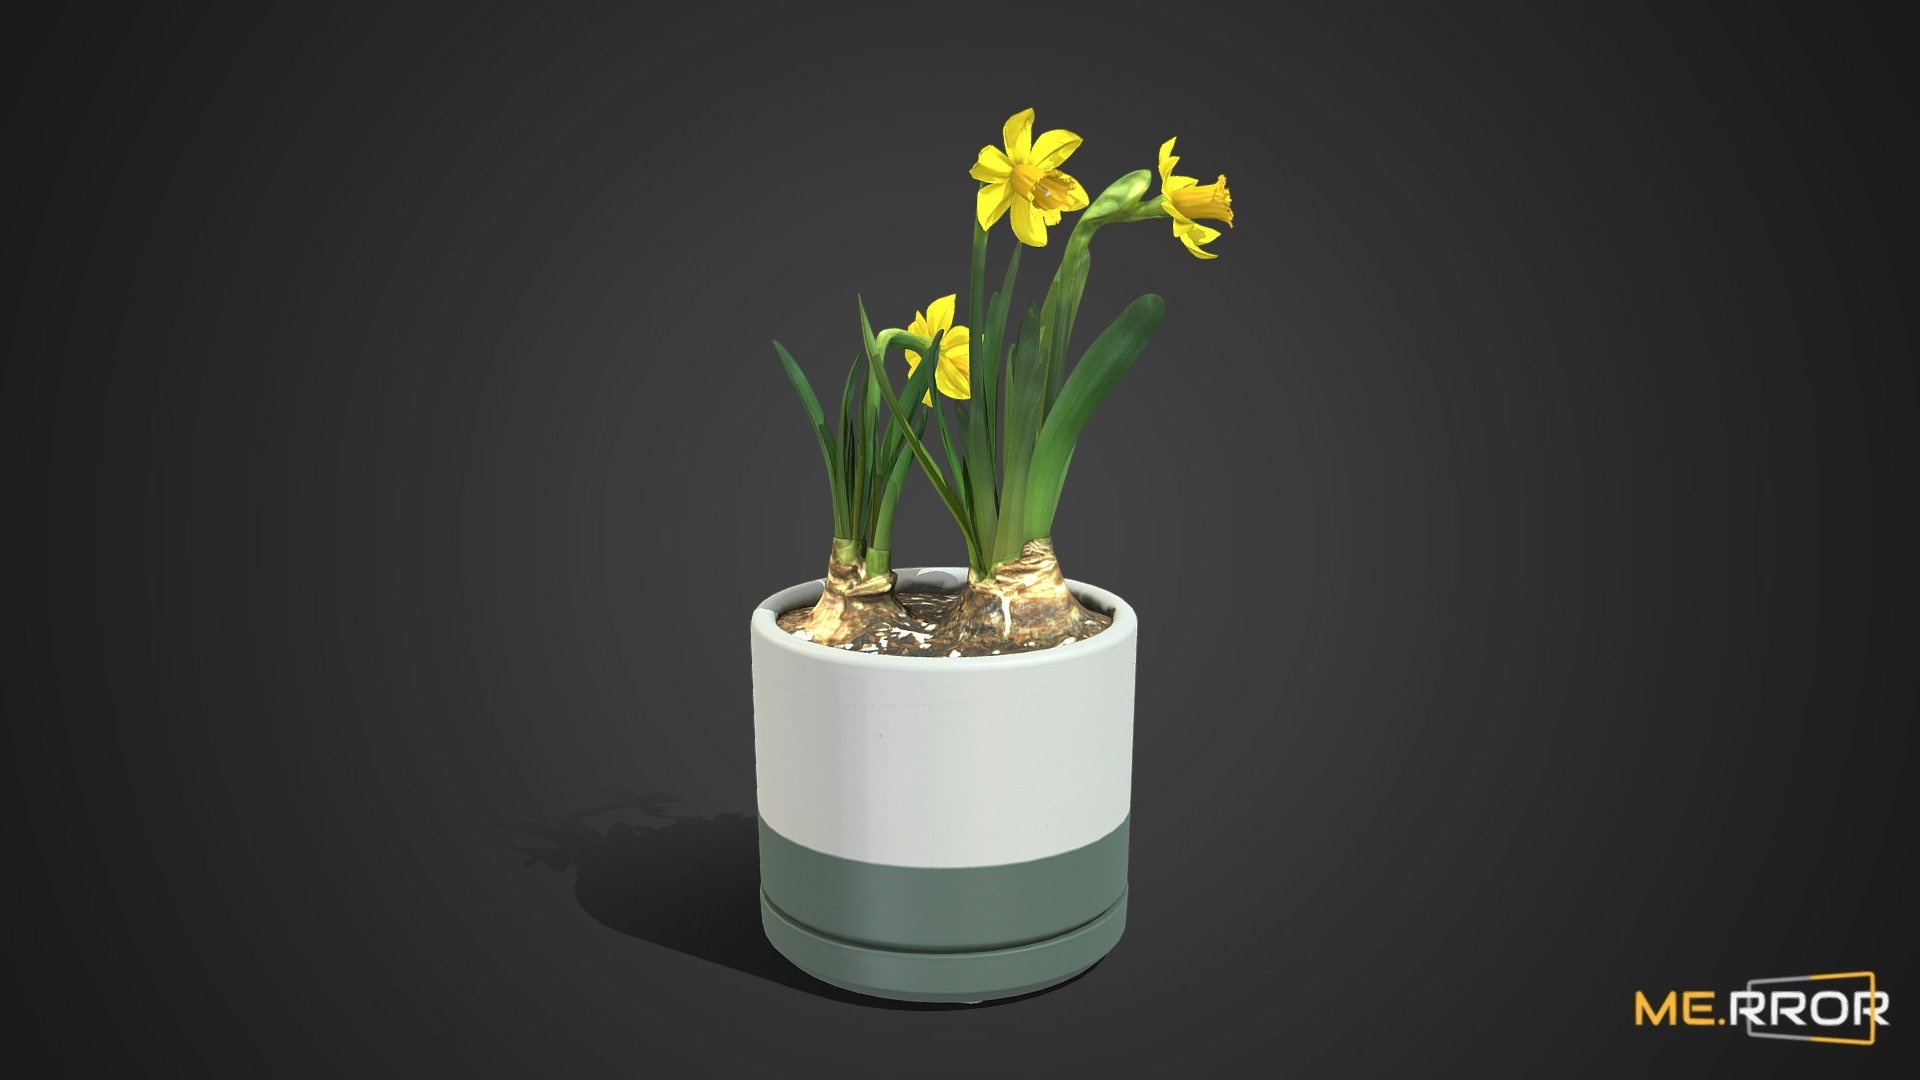 MERROR is a 3D Content PLATFORM which introduces various Asian assets to the 3D world


3DScanning #Photogrametry #ME.RROR - [Game-Ready] Daffodil Pot - Buy Royalty Free 3D model by ME.RROR (@merror) 3d model